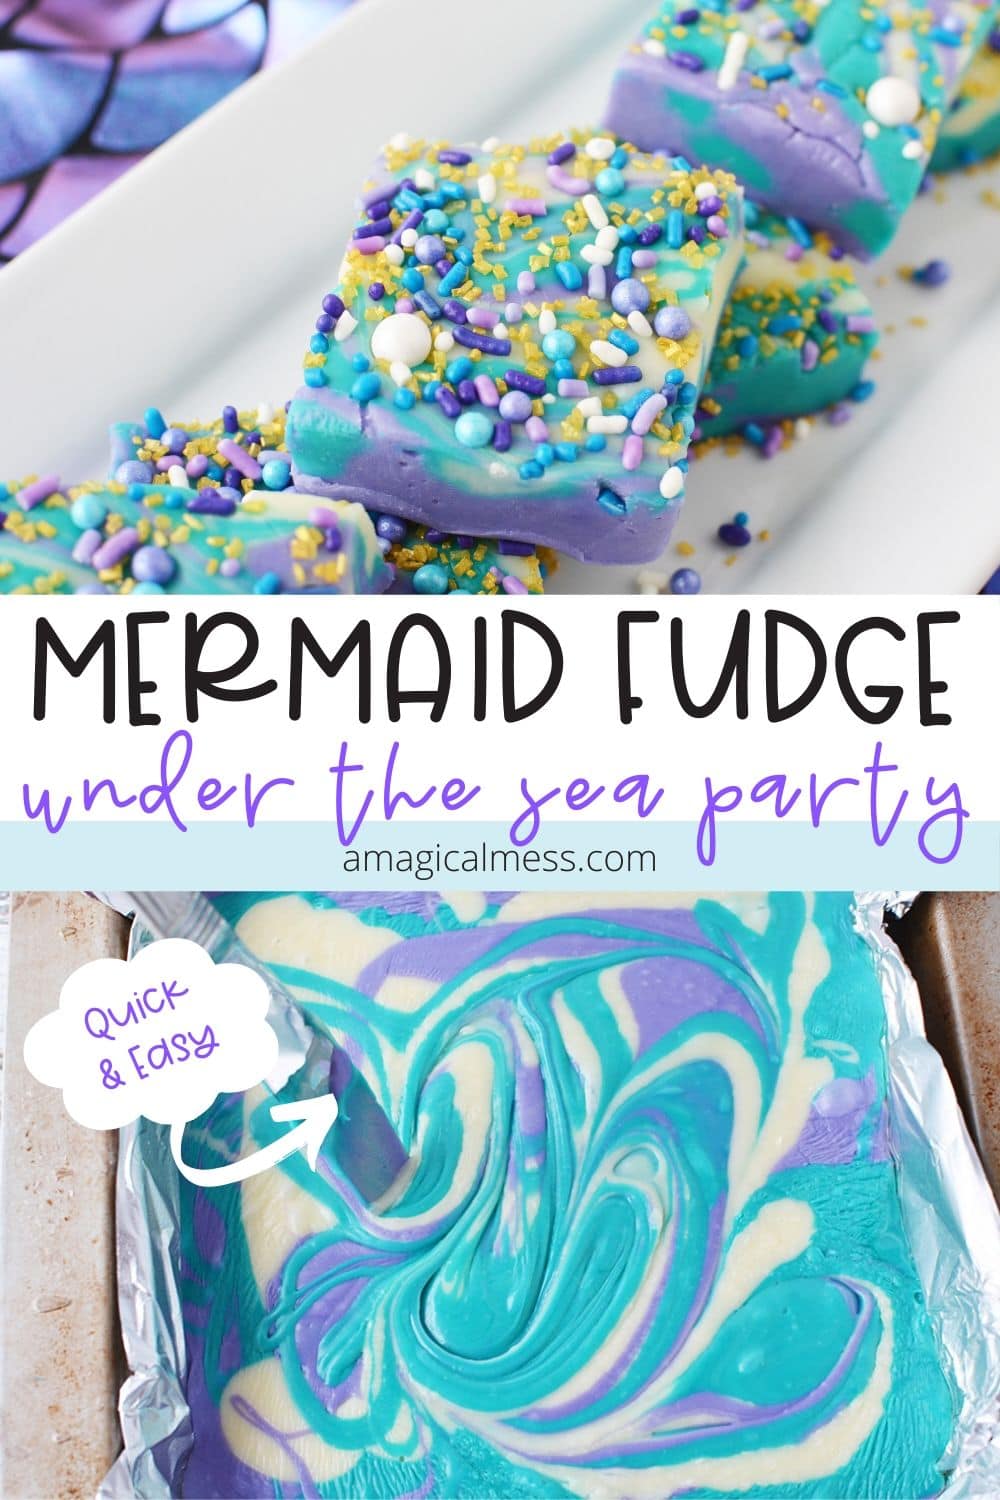 Mermaid fudge on a dish and in a pan.